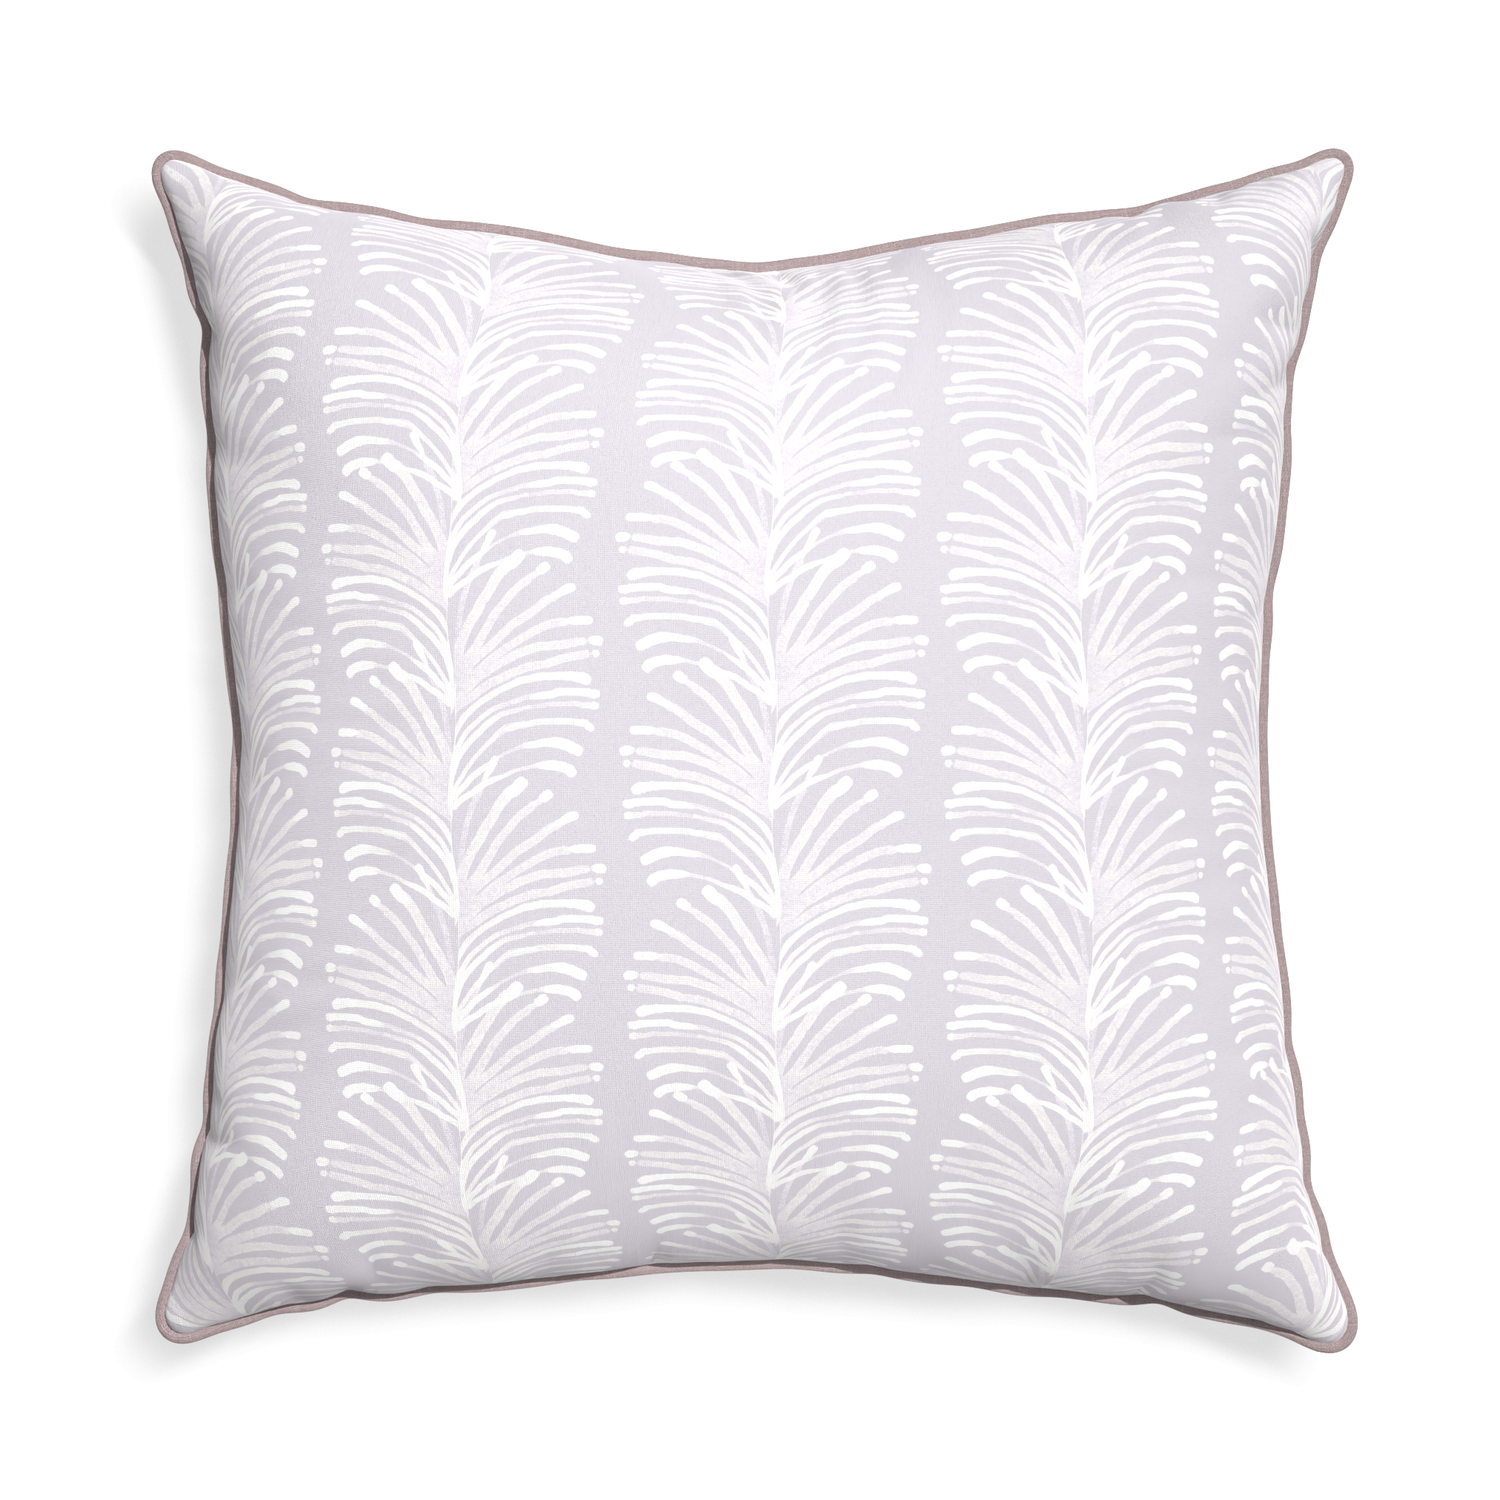 Euro-sham emma lavender custom lavender botanical stripepillow with orchid piping on white background